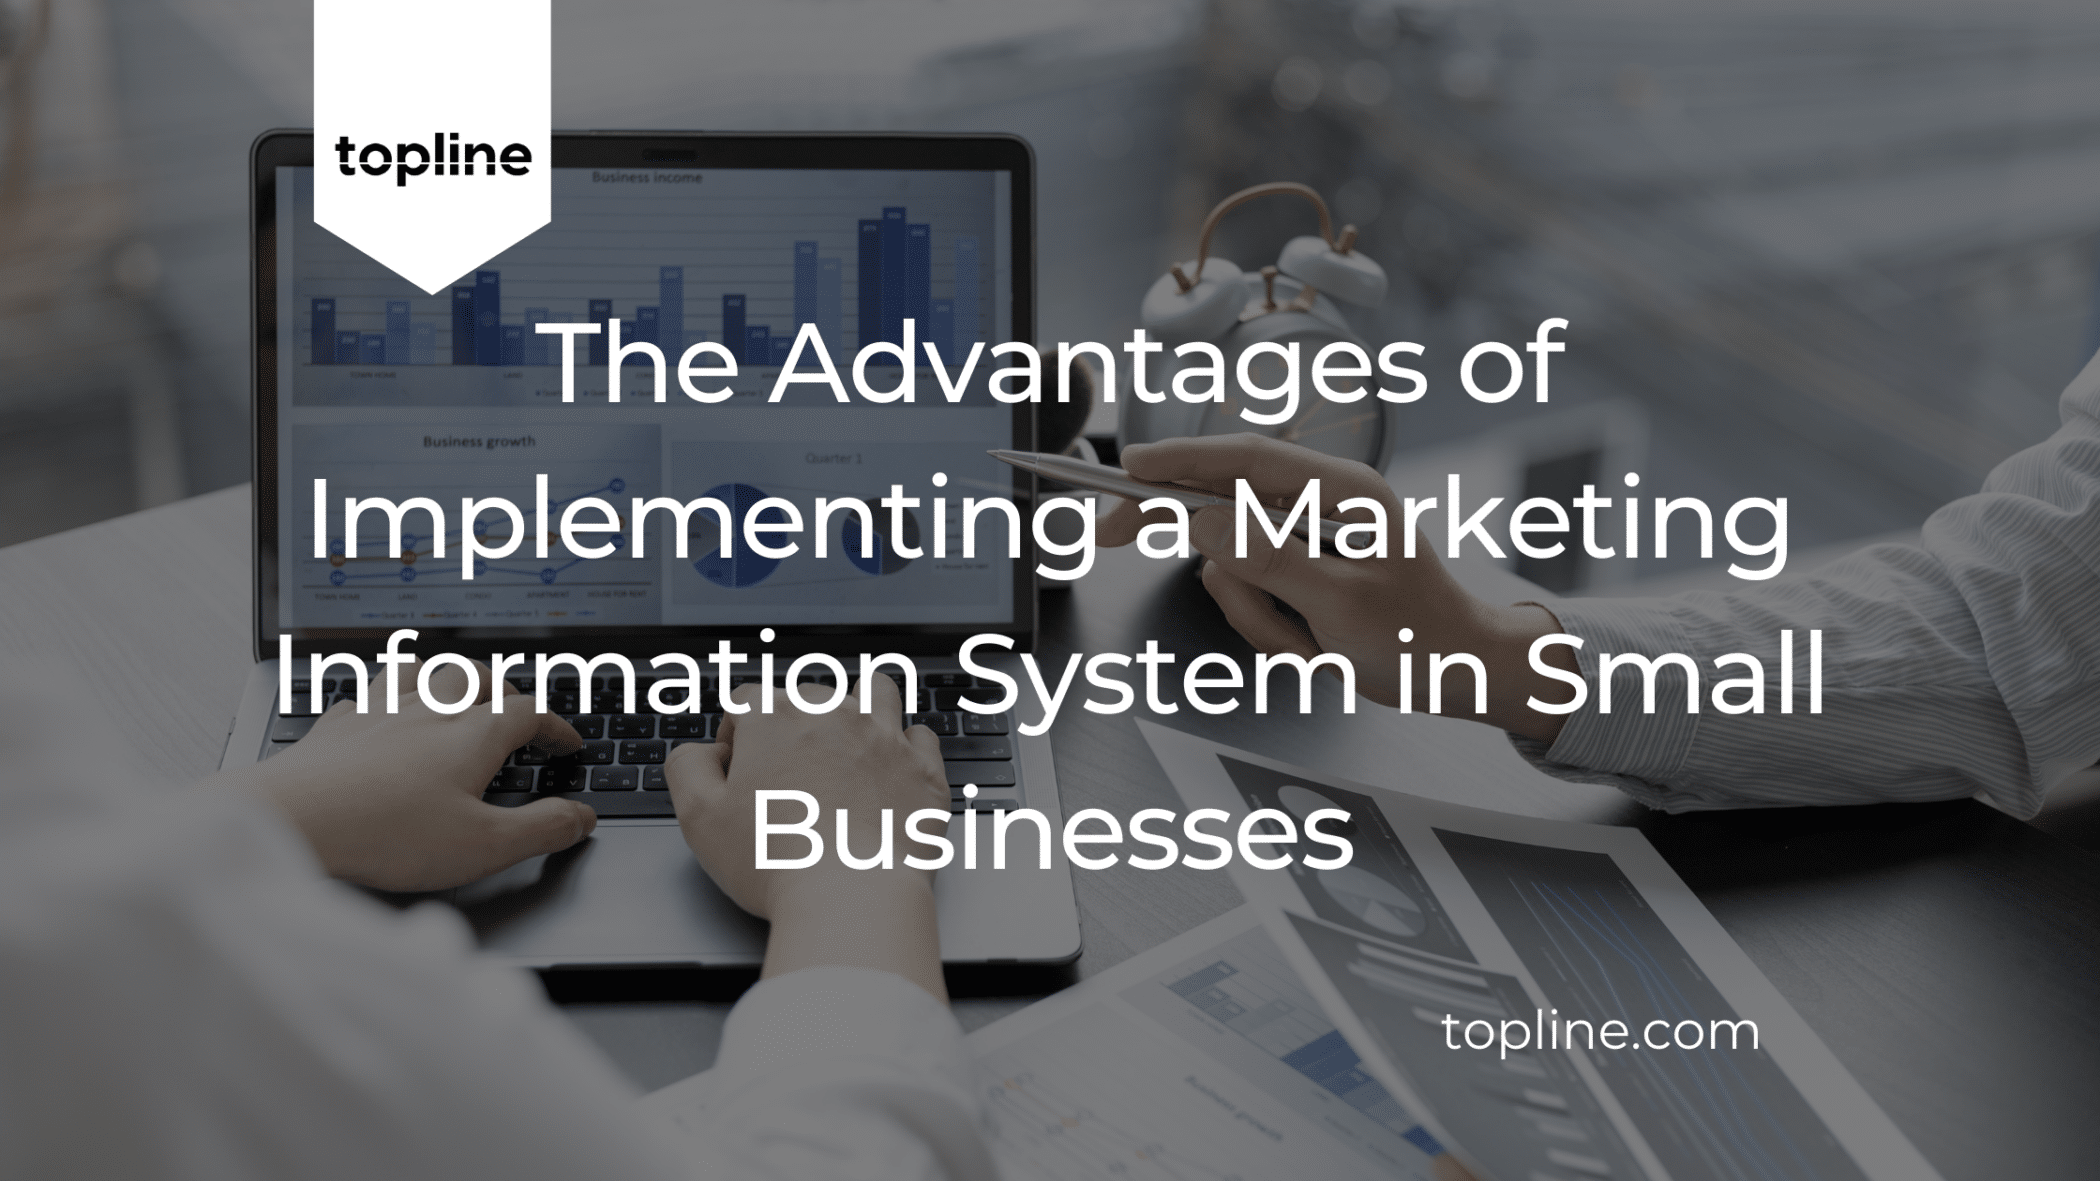 The Advantages of Implementing a Marketing Information System in a Small Businesses